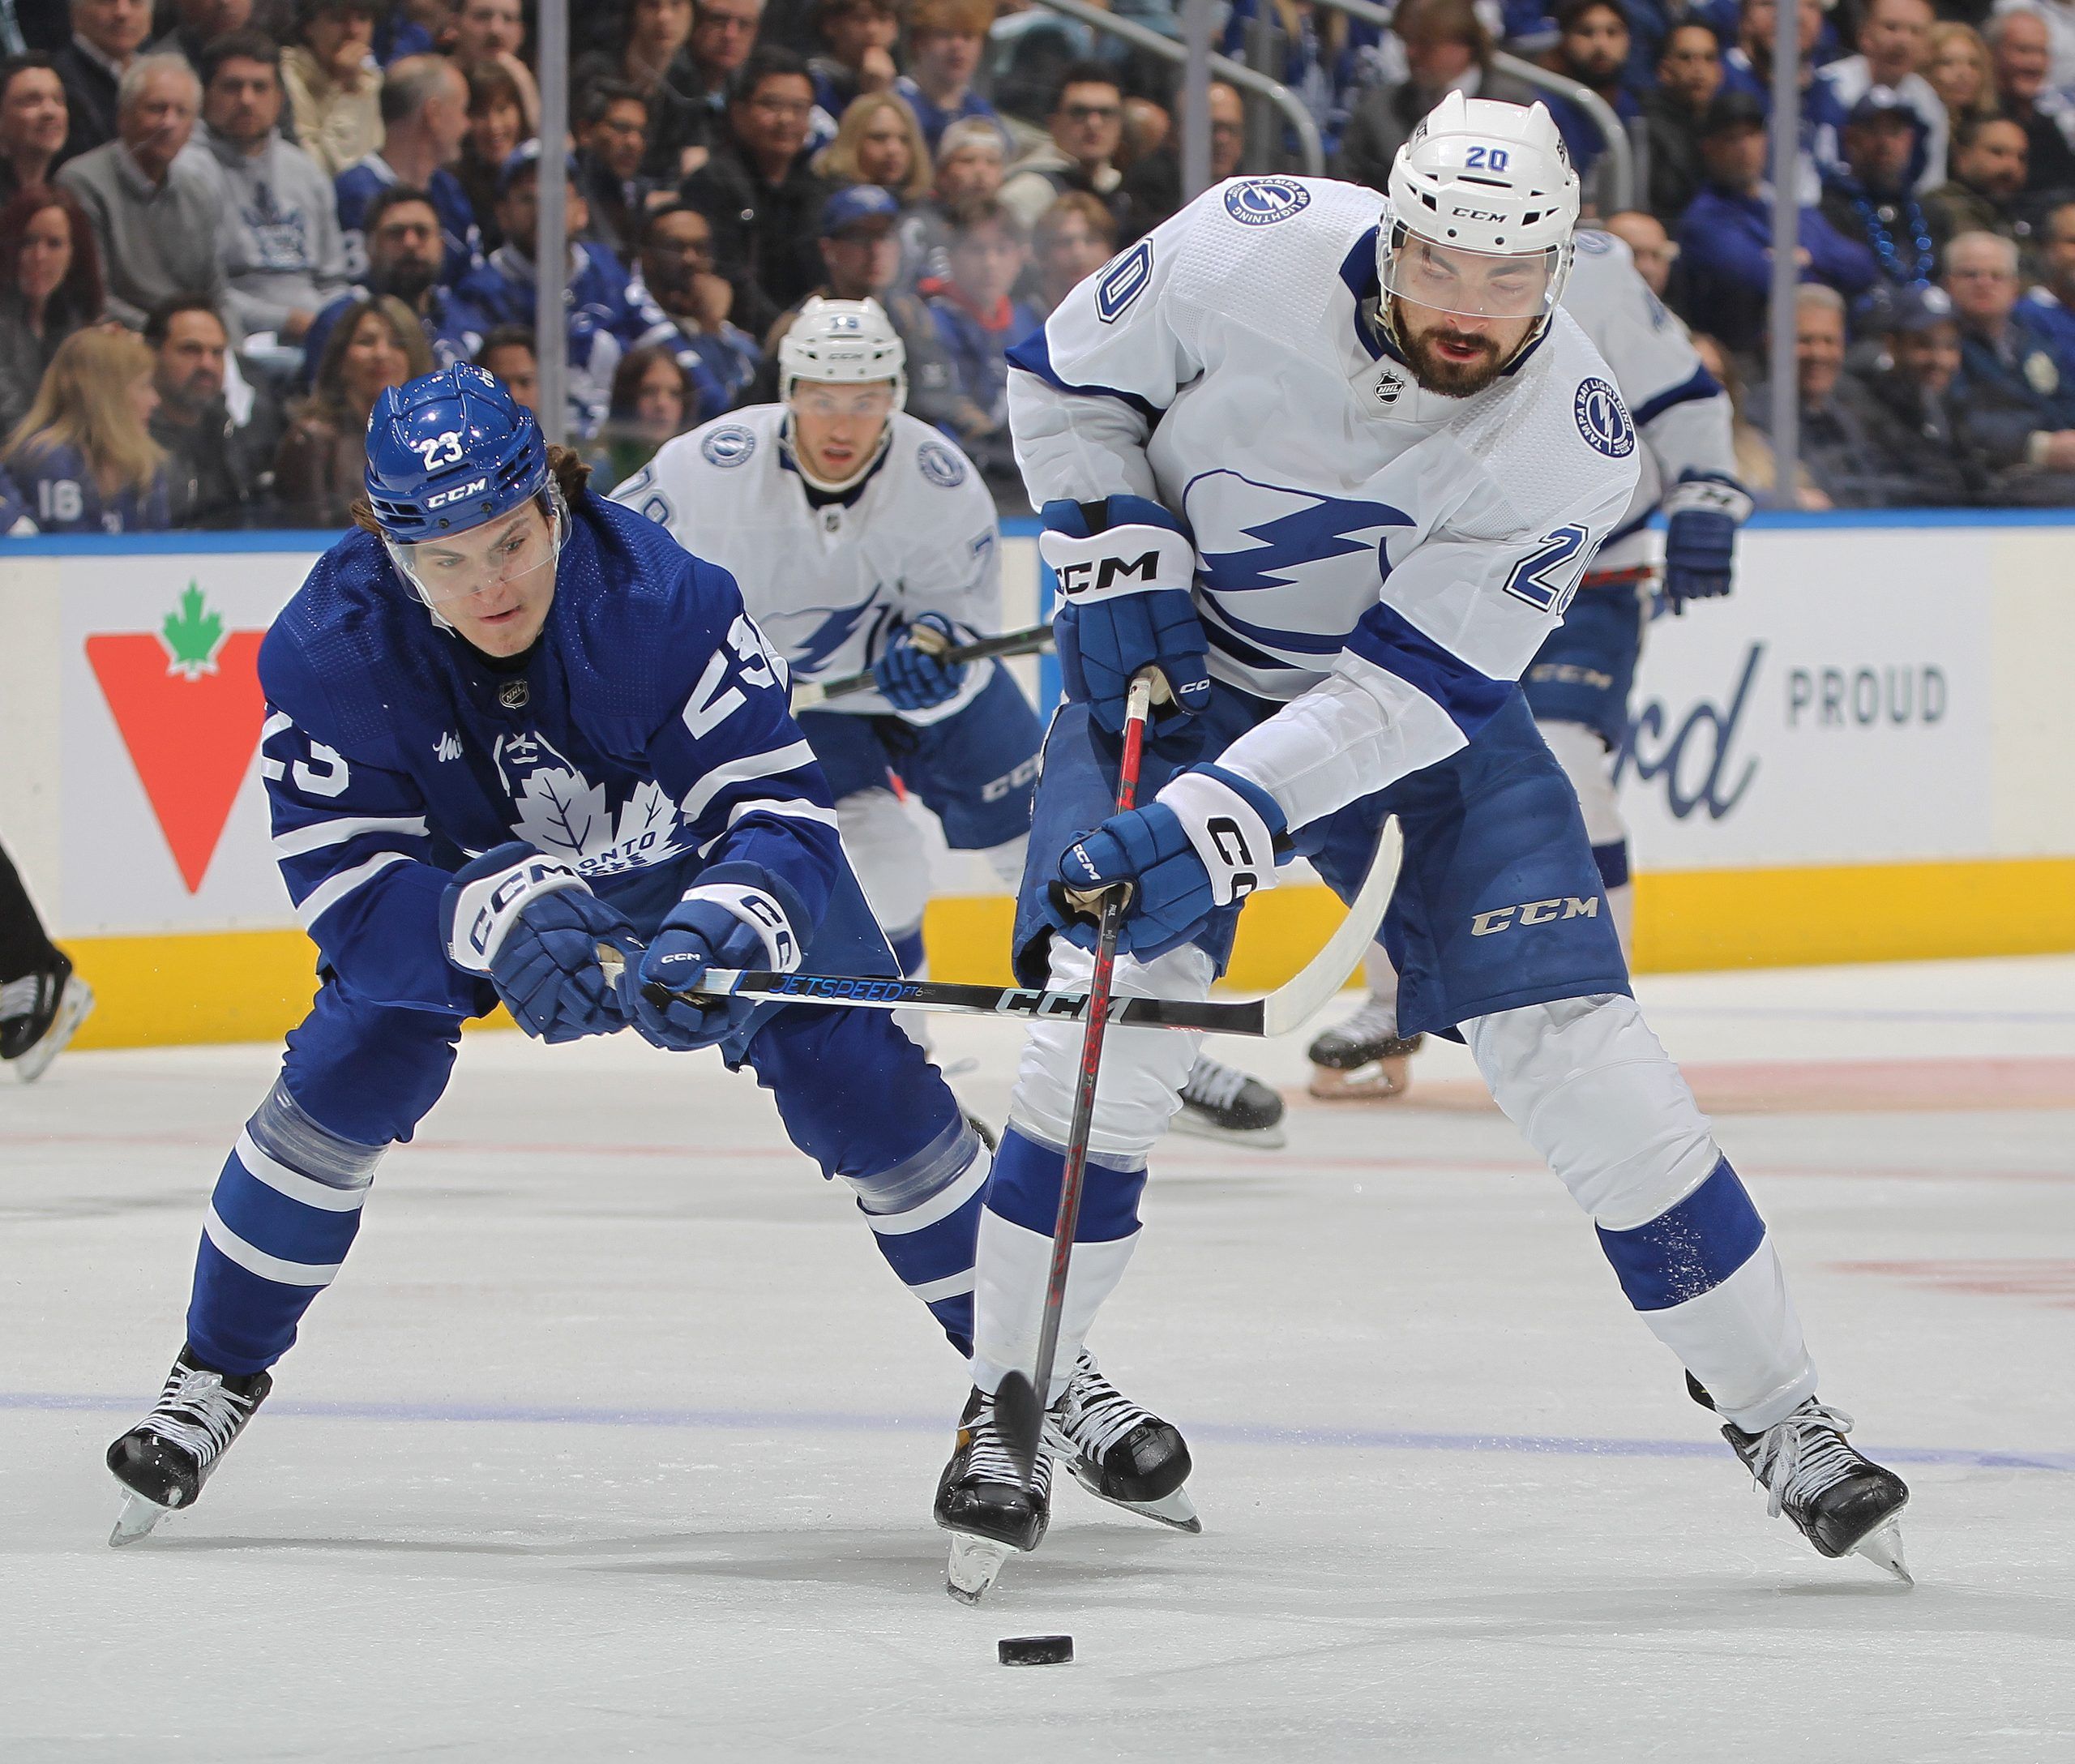 Did the Lightning Steal the Leafs Team Colors? - Toronto Maple